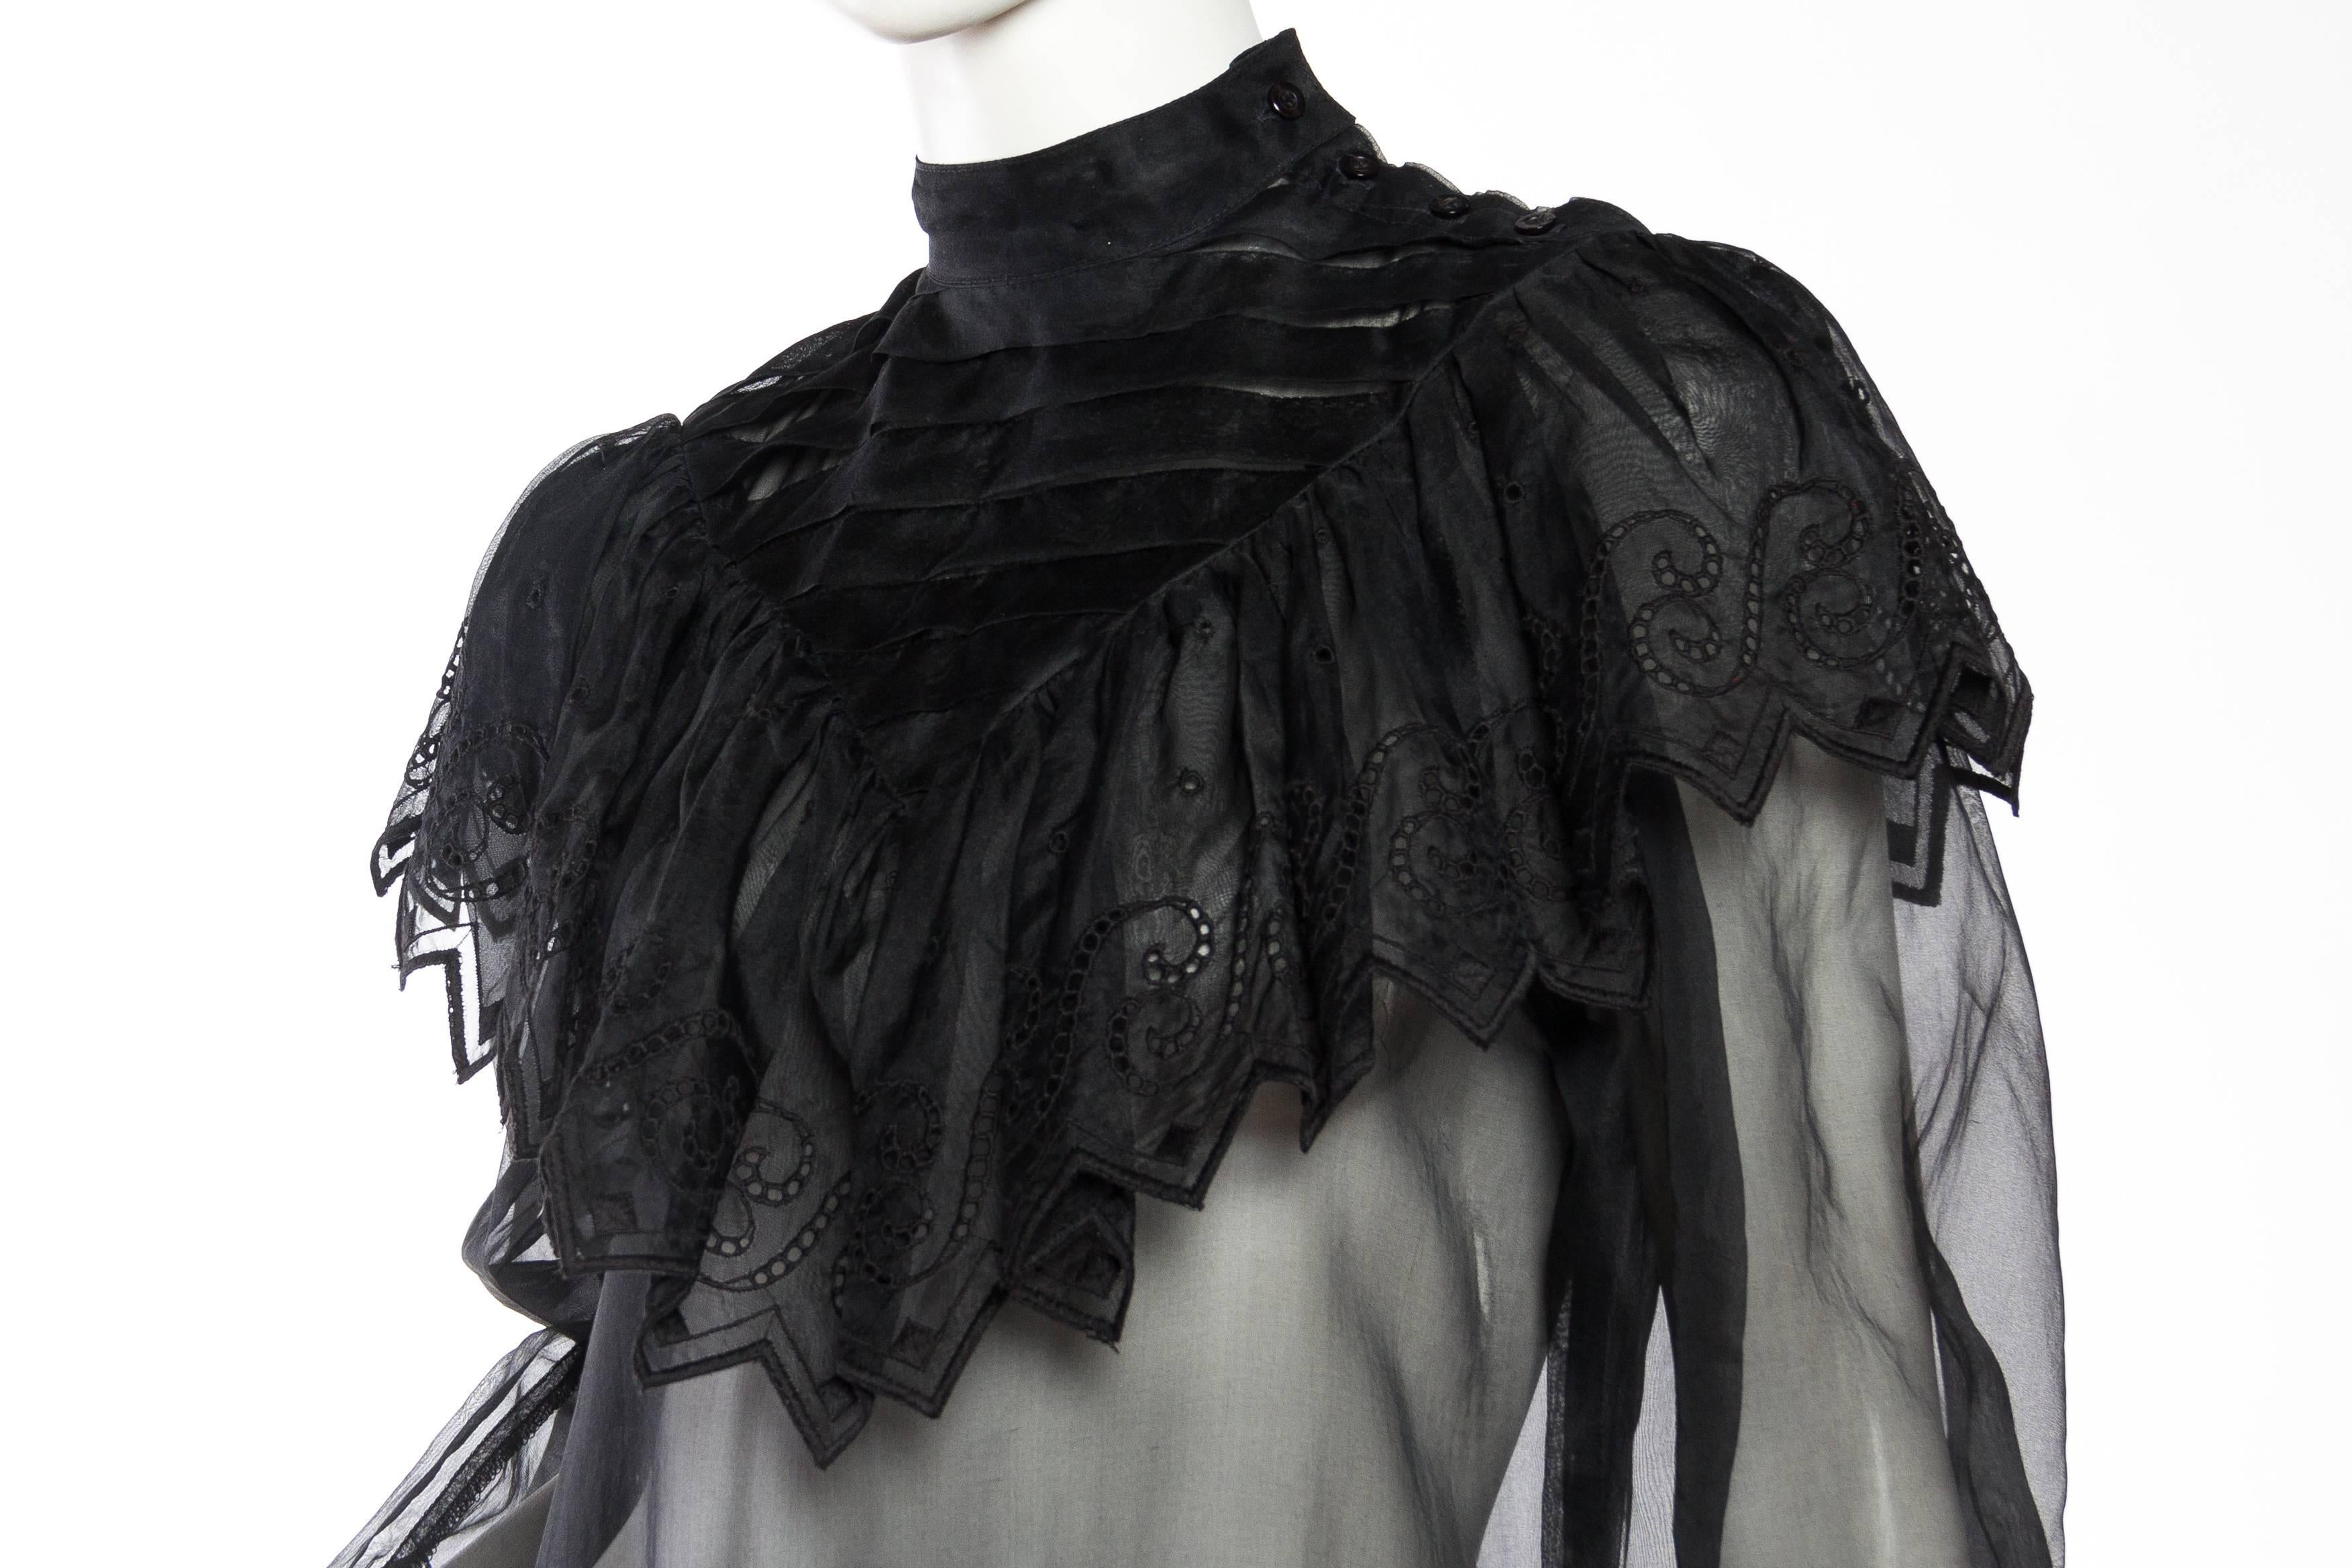 1970s Gucci Style Silk Organza Victorian Inspired Sheer Lace Dress 2